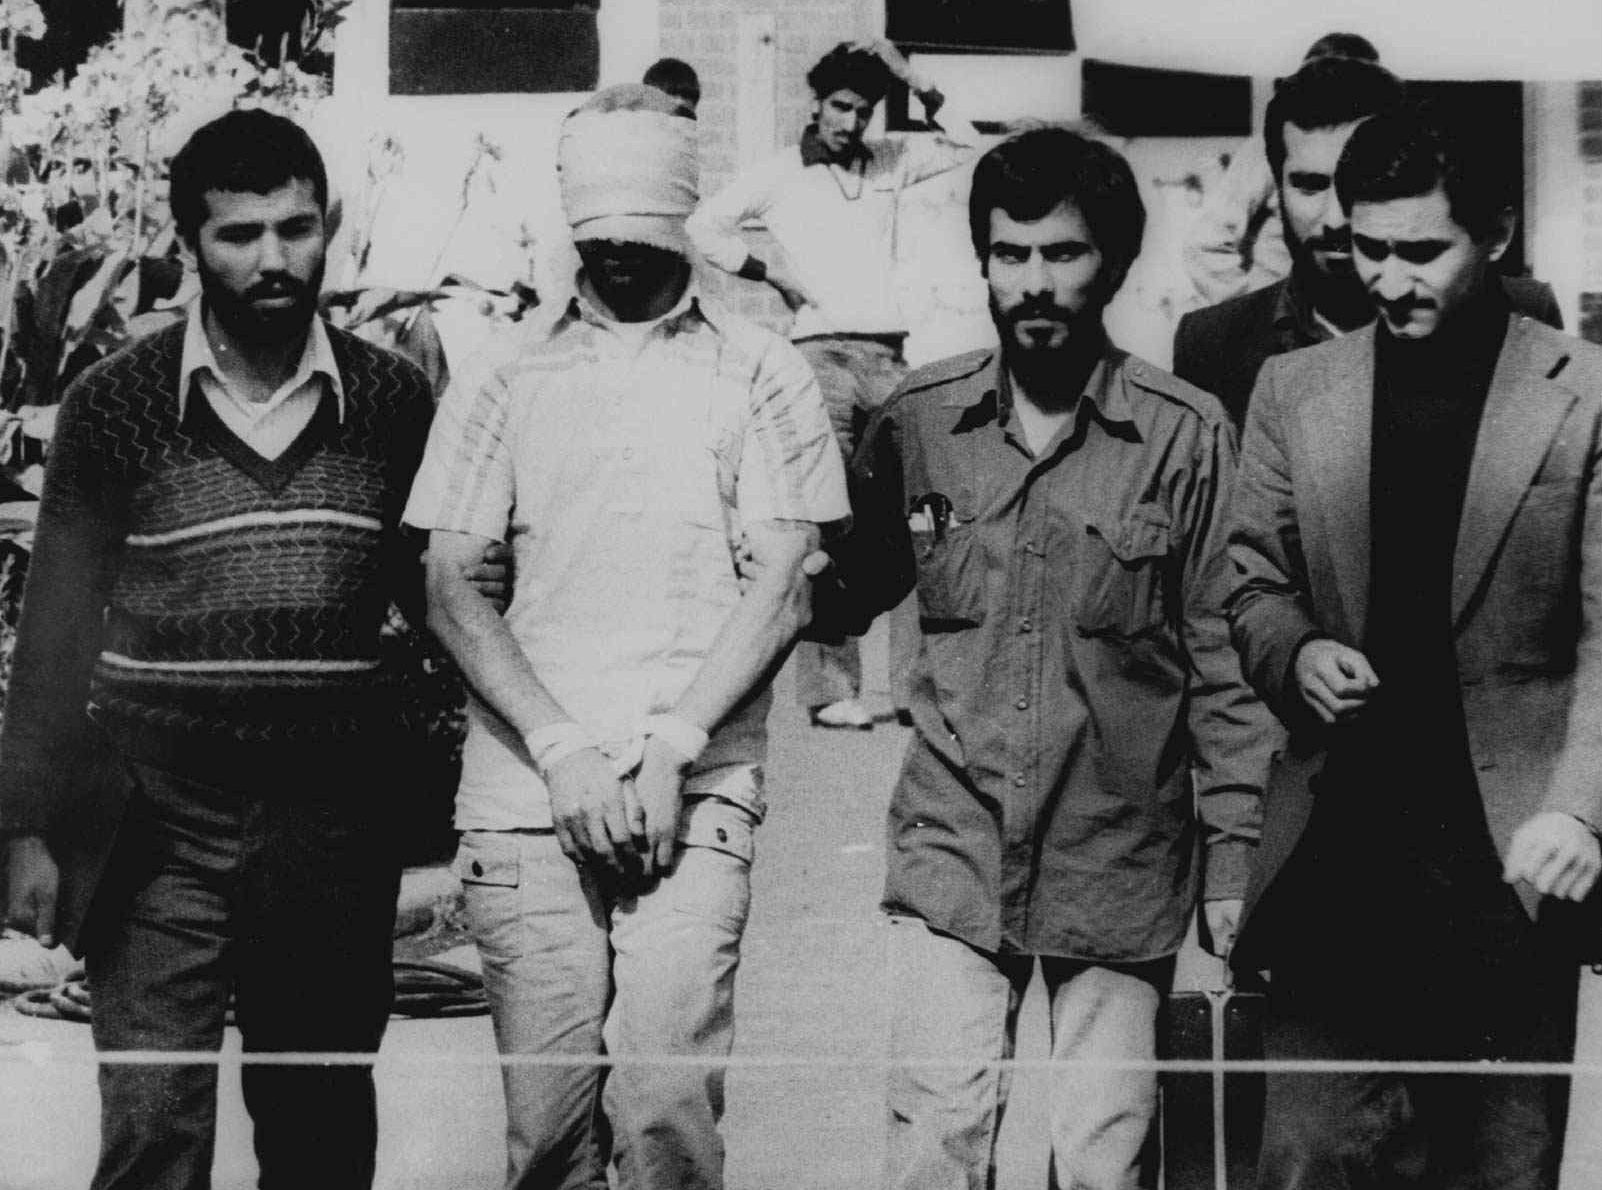 The 1979 Iran hostage crisis gripped the country and may have cost a president his job. Now the Americans who spent 444 days in captivity and inspired a nation to tie yellow